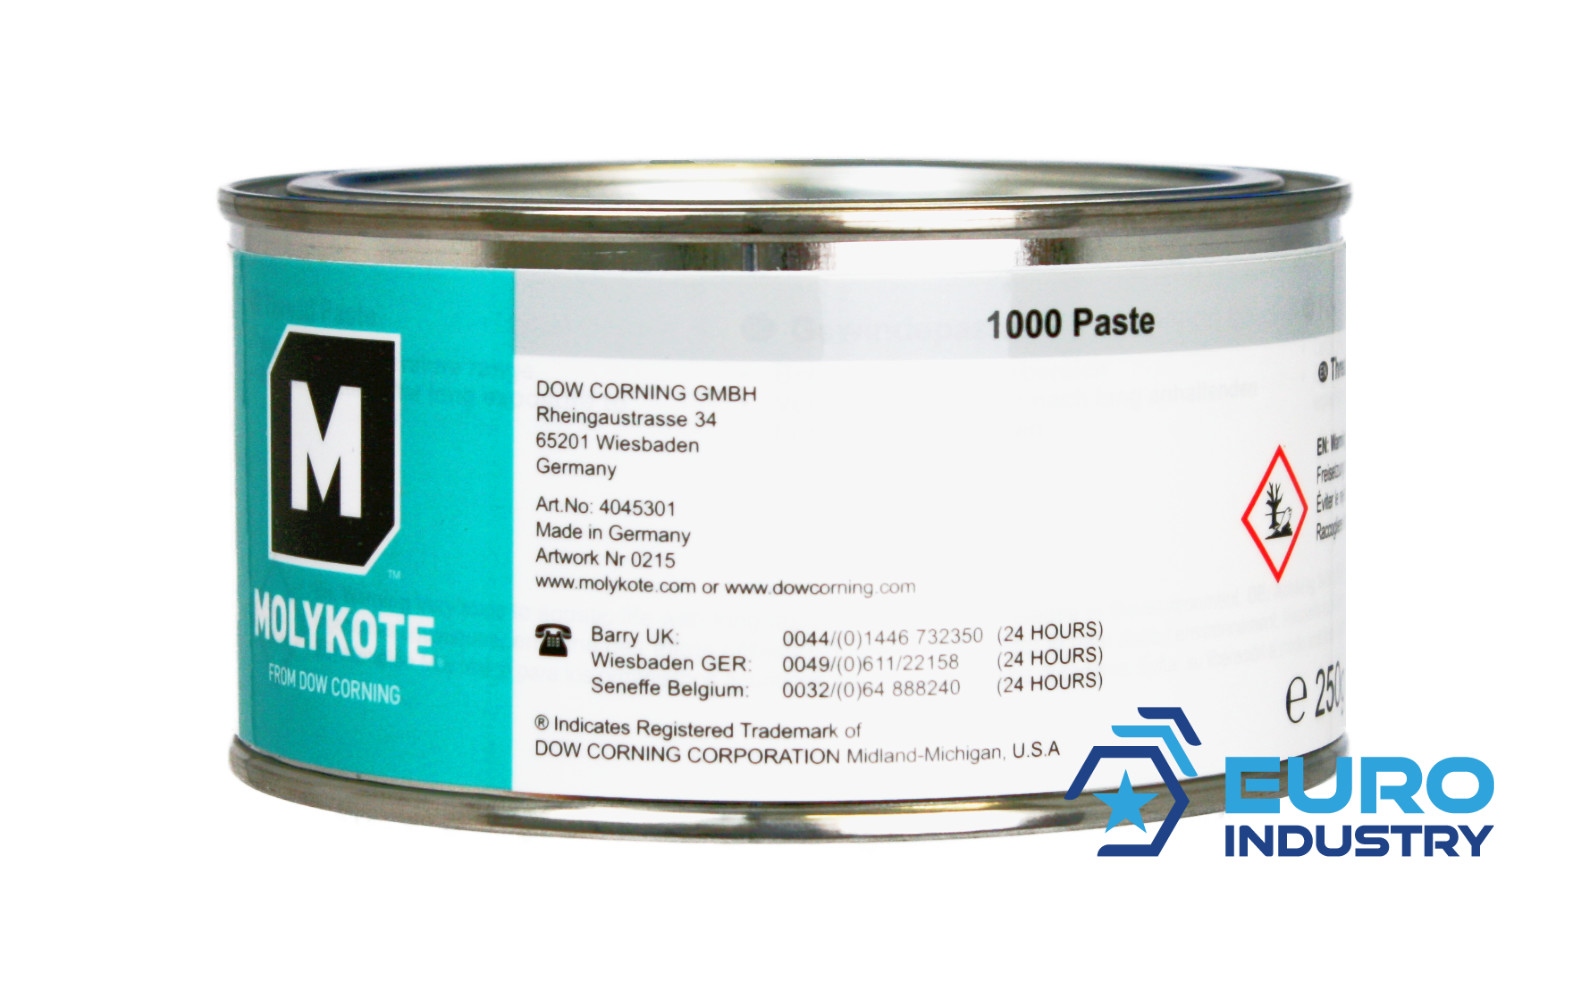 pics/Molykote/eis-copyright/molykote-1000_solid-lubricant-_paste-for-metall_joints-250g.jpg